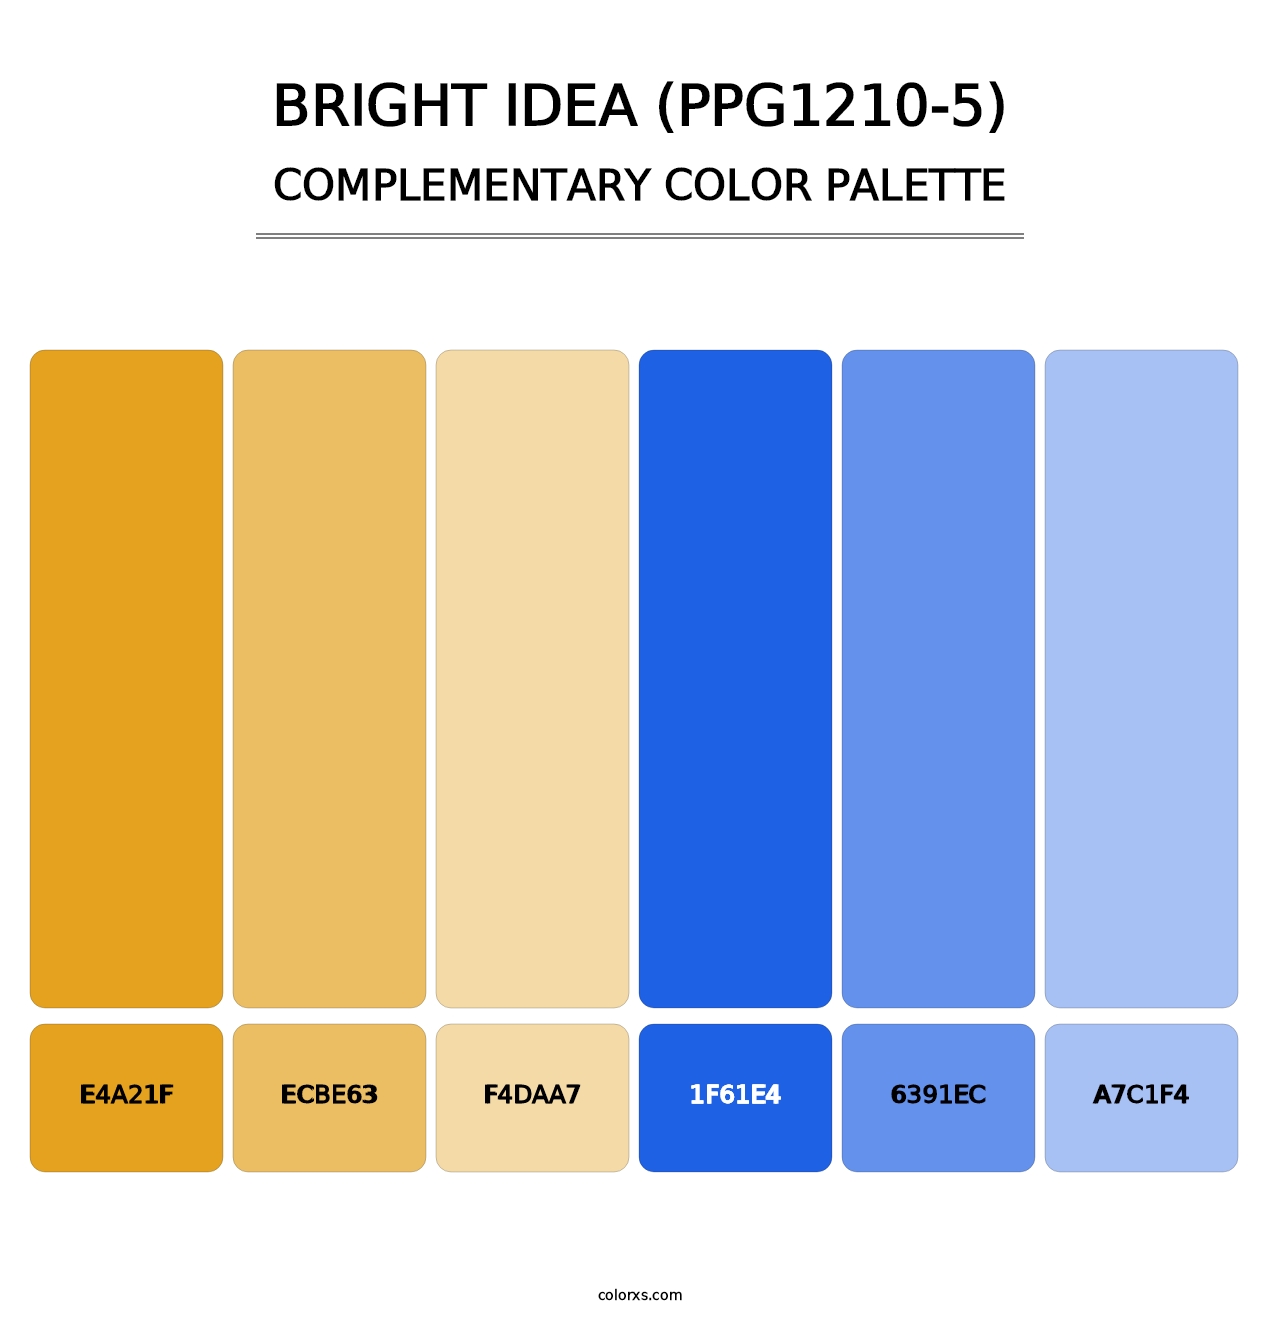 Bright Idea (PPG1210-5) - Complementary Color Palette